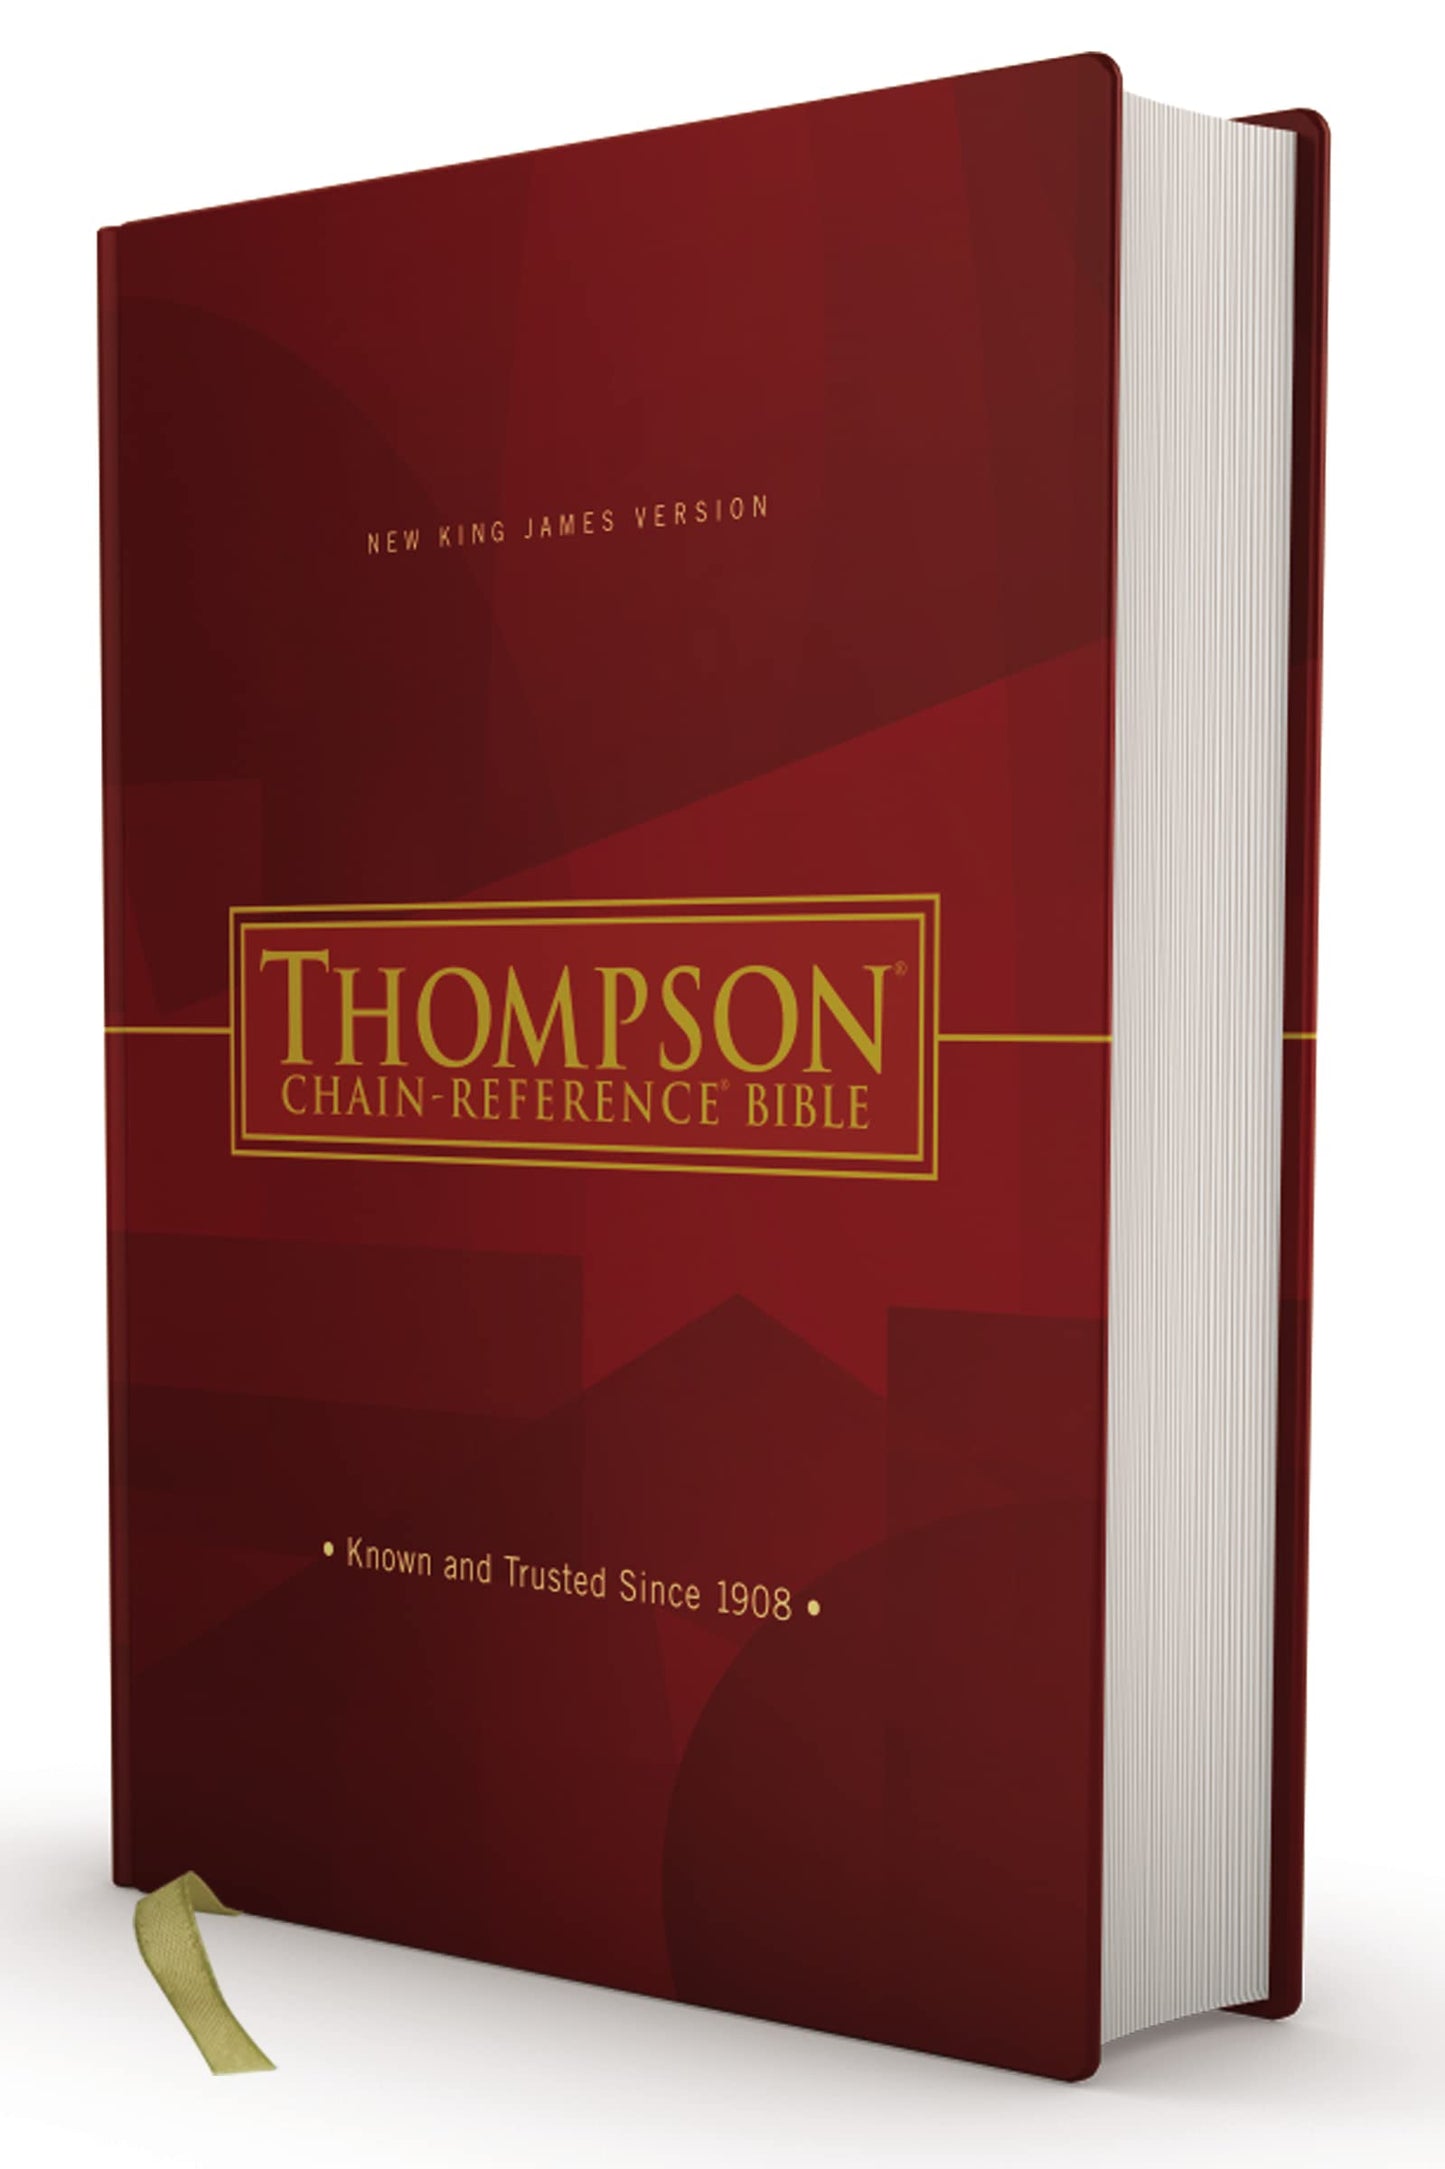 NKJV, Thompson Chain-Reference Bible, Hardcover, Red Letter (hardcover)